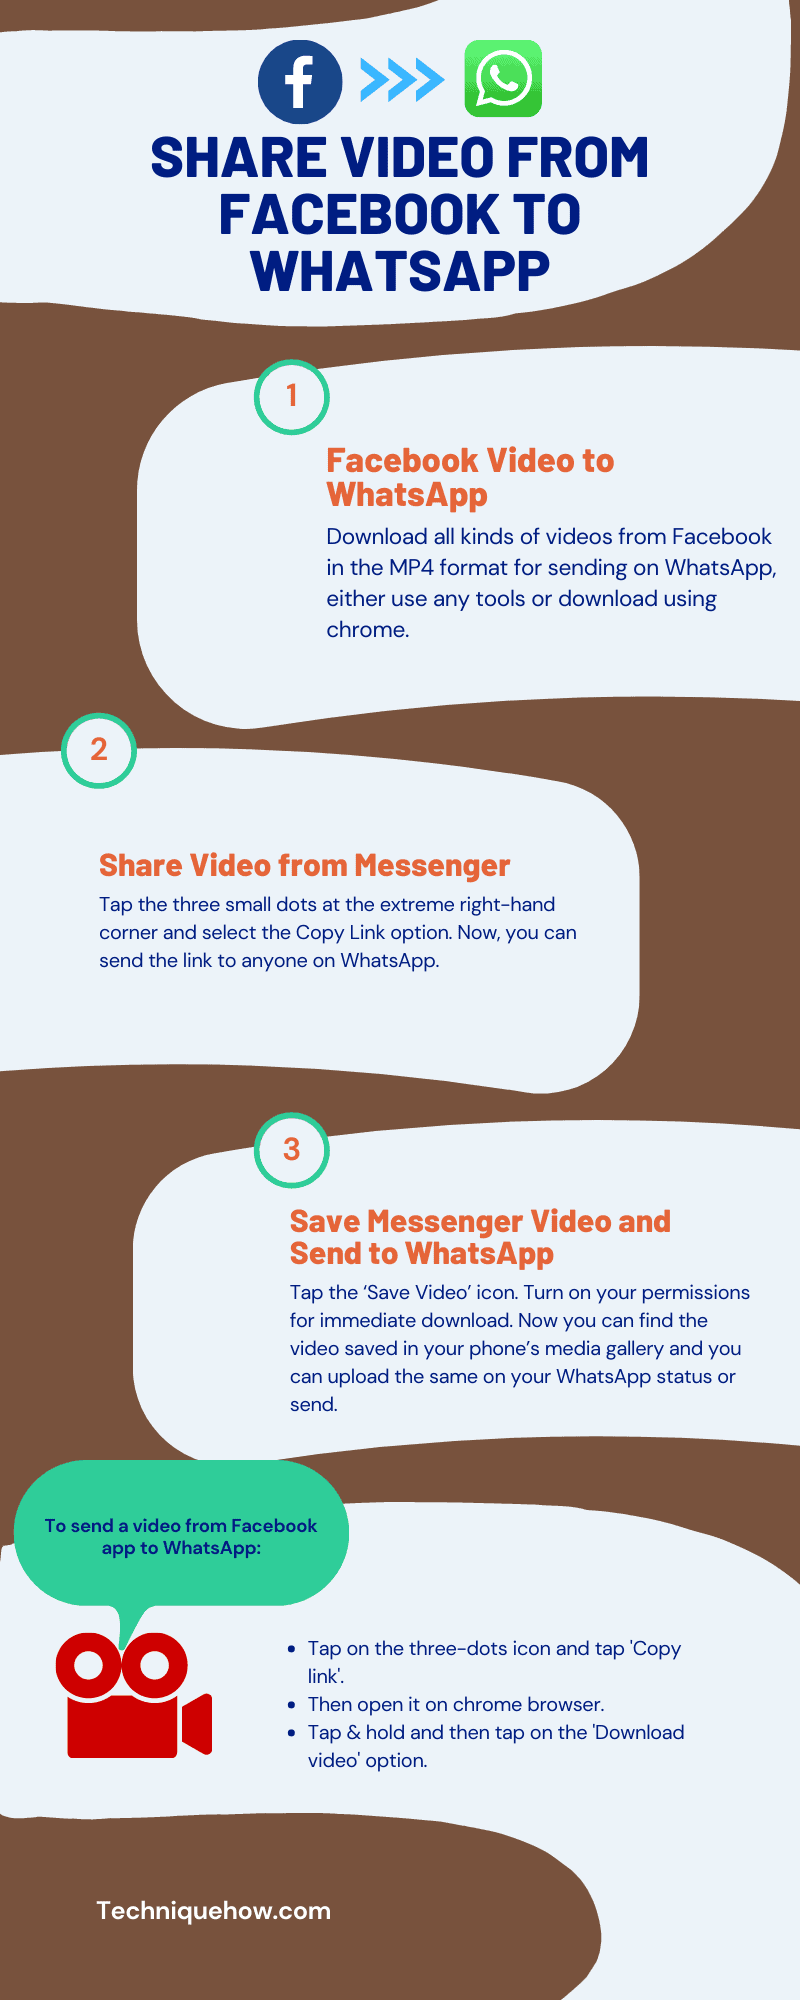 infographic_Share Video From Facebook to WhatsApp